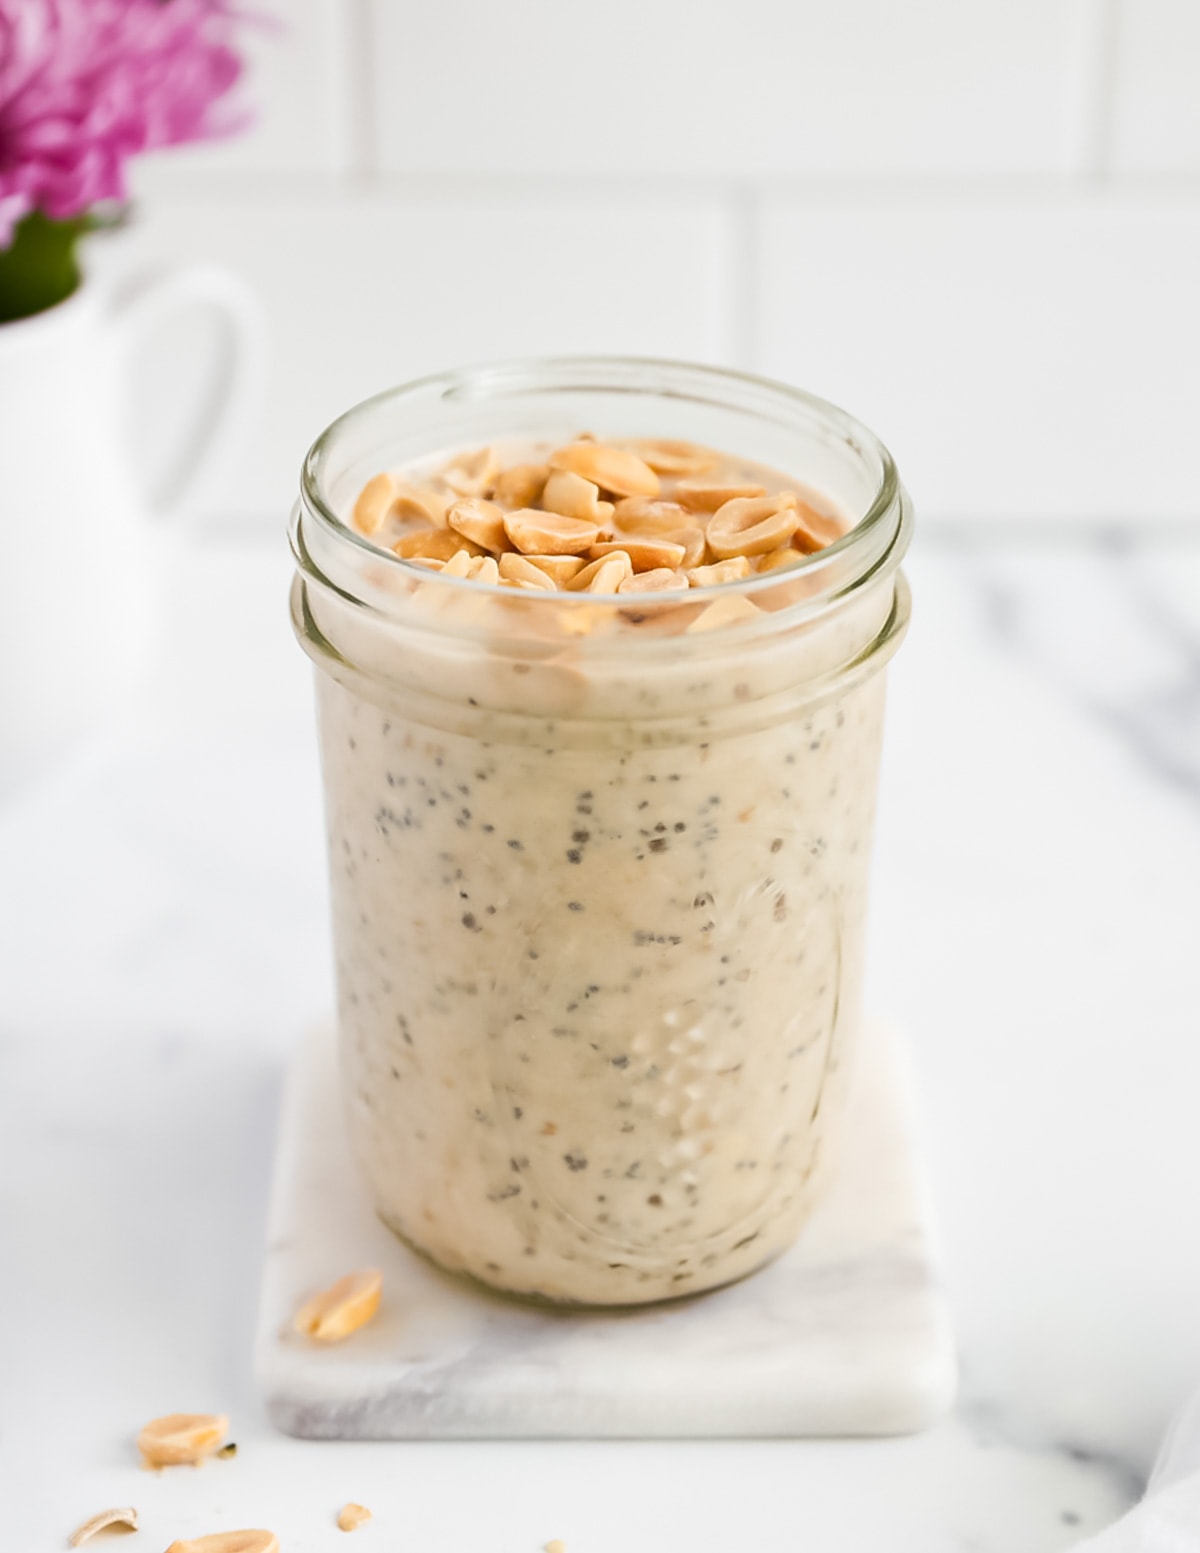 A close up picture of a glass jar filled with peanut butter overnight oats with chia seeds, there are peanuts on top.